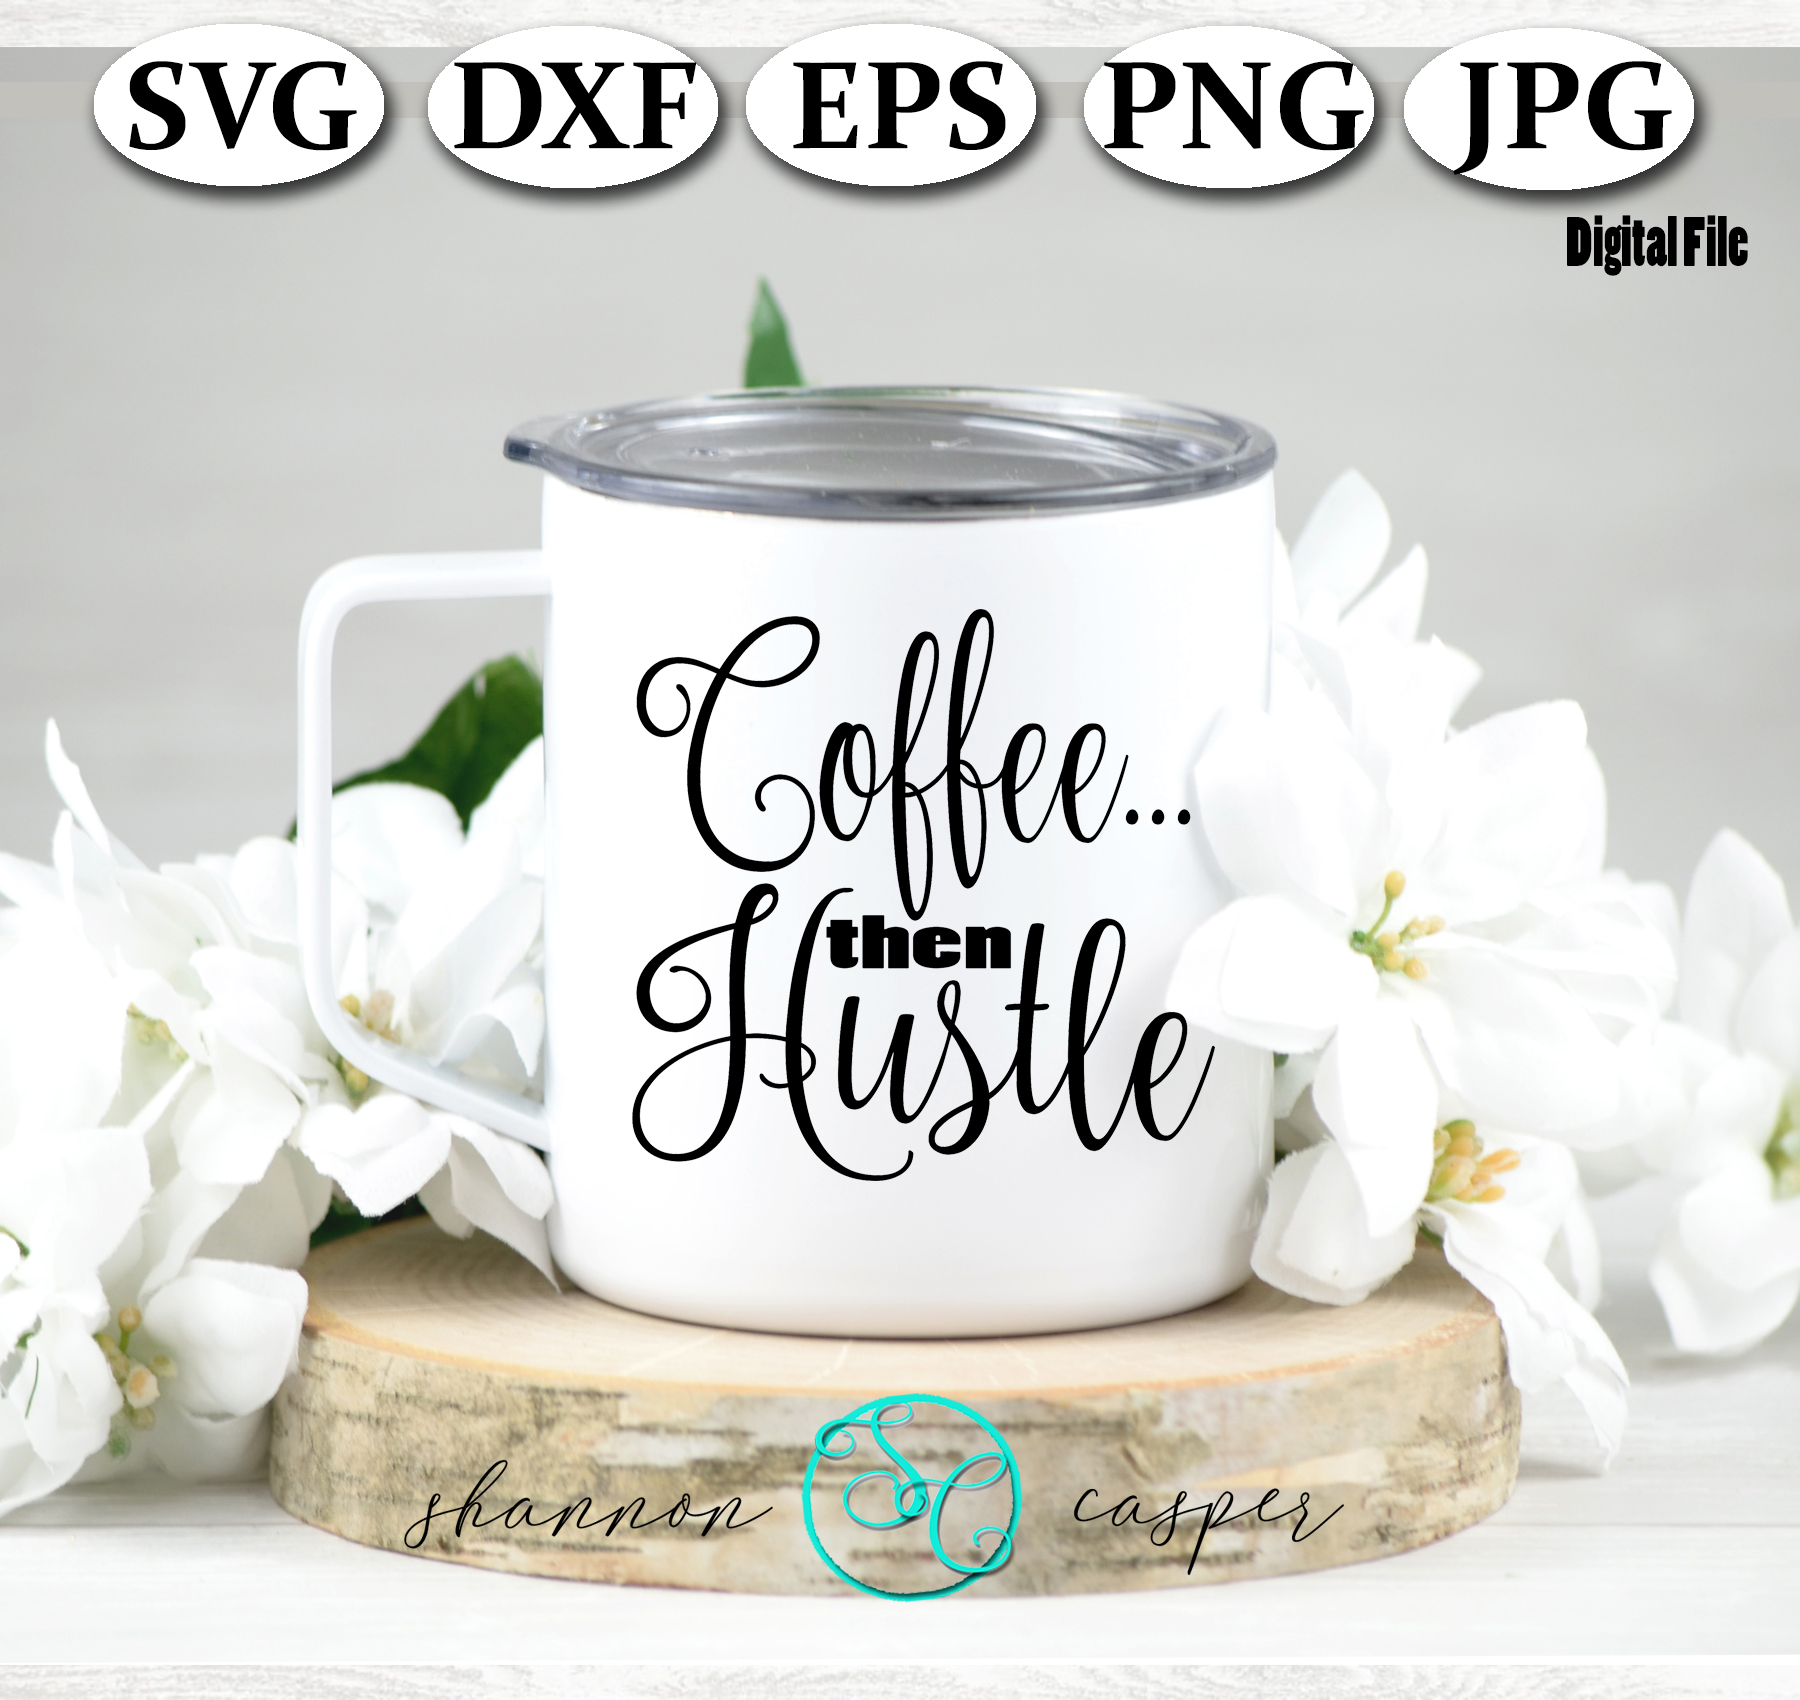 Download Funny Coffee Quote SVG| Coffee then Hustle|Coffee Cup Saying